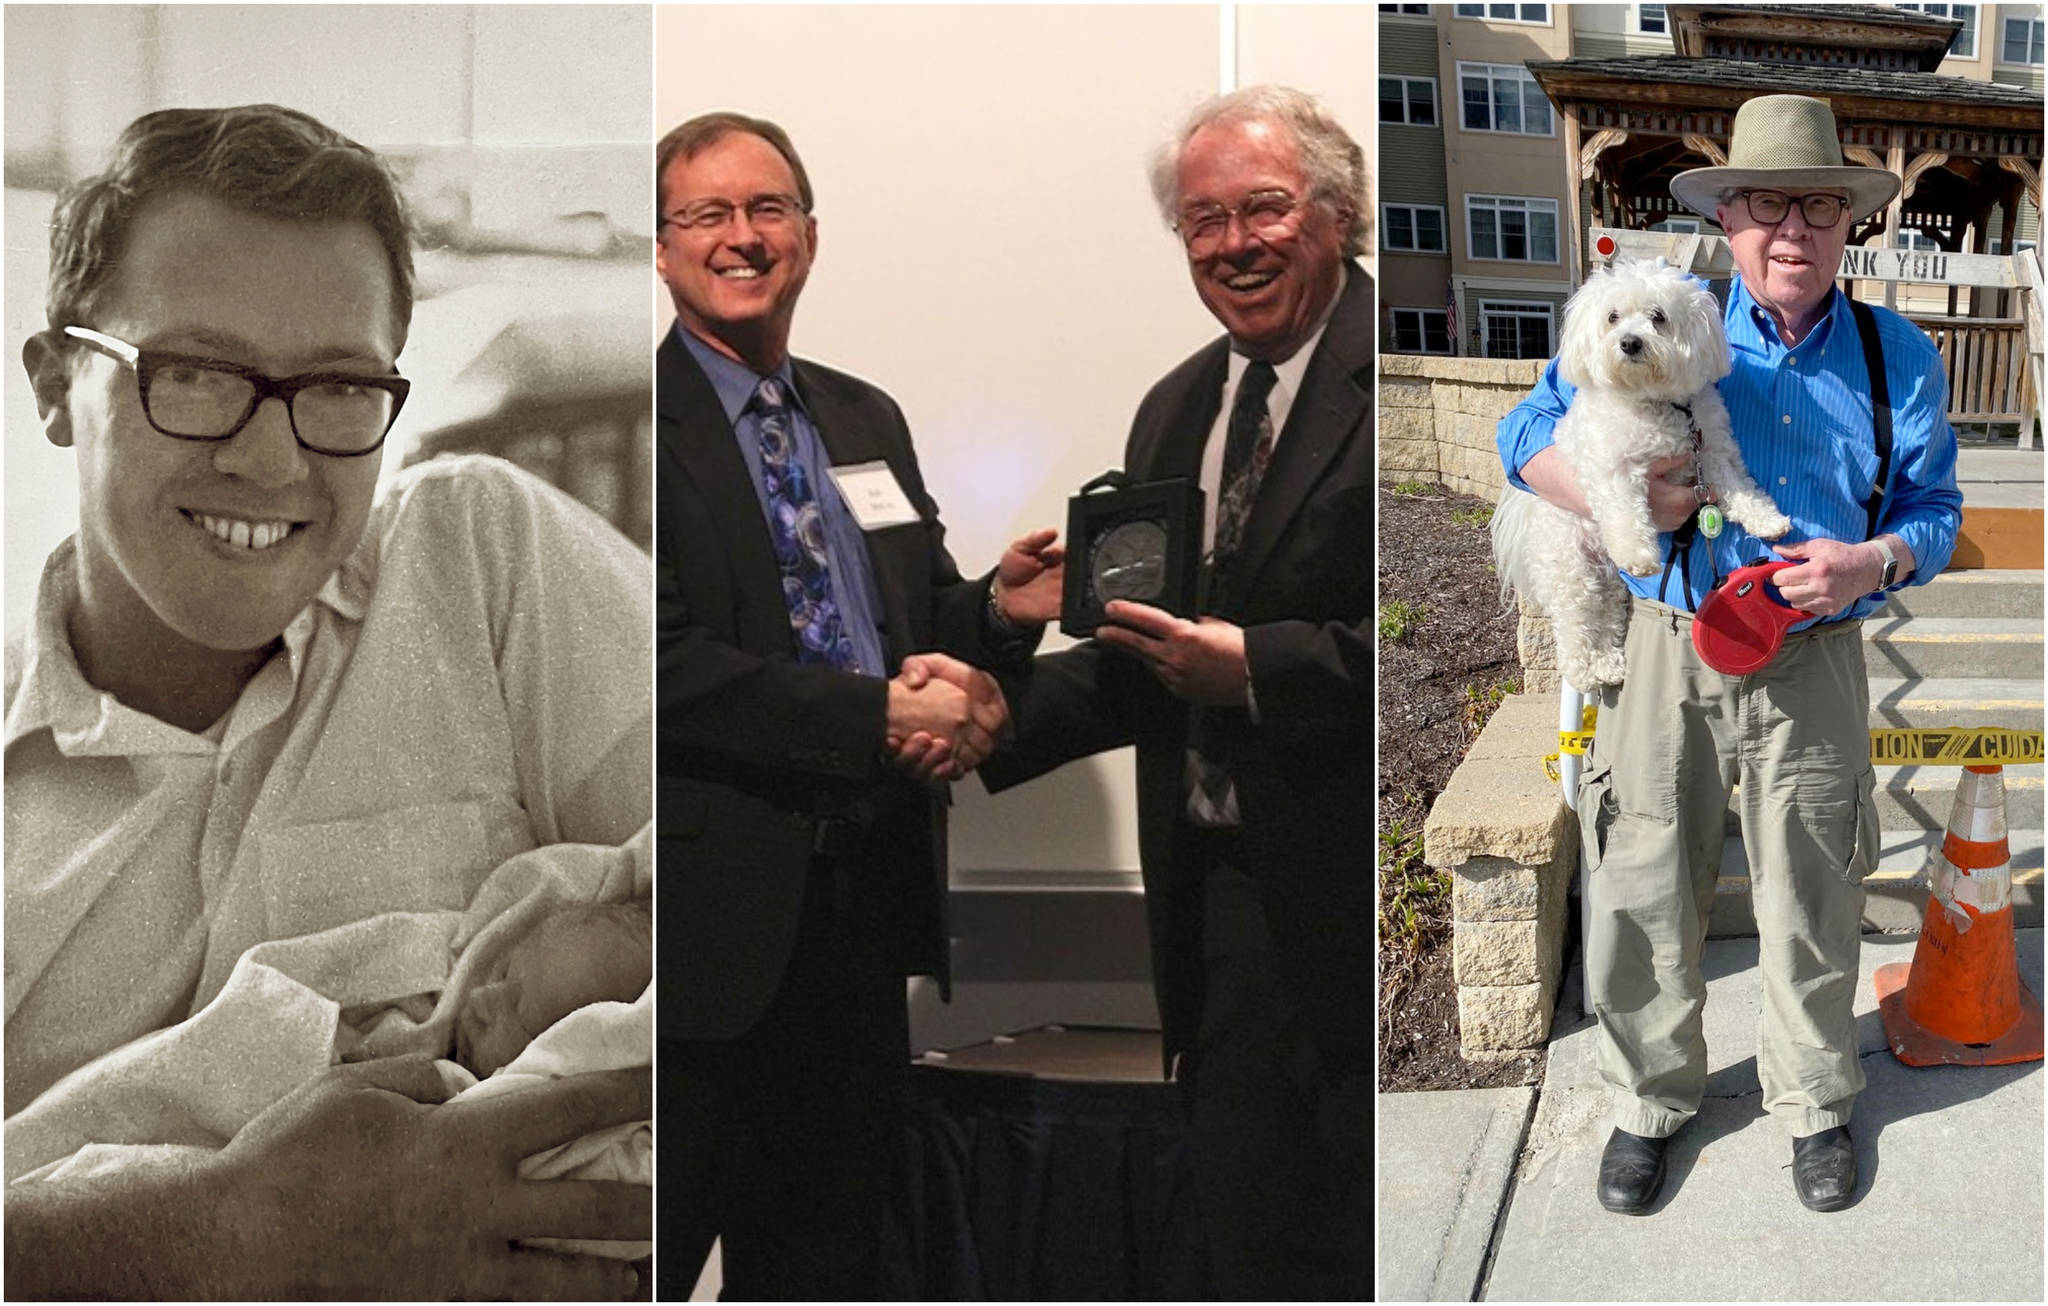 Neal Brown in 1967, holding his newborn son Kris. Brown accepts the Roger Smith Lifetime Achievement award in 2016 from Geophysical Institute director Bob McCoy. Brown in 2021, on an outing in New Hampshire with his dog Molly. Courtesy Photos / Kris Brown, Geophysical Institute, Becky Lees)